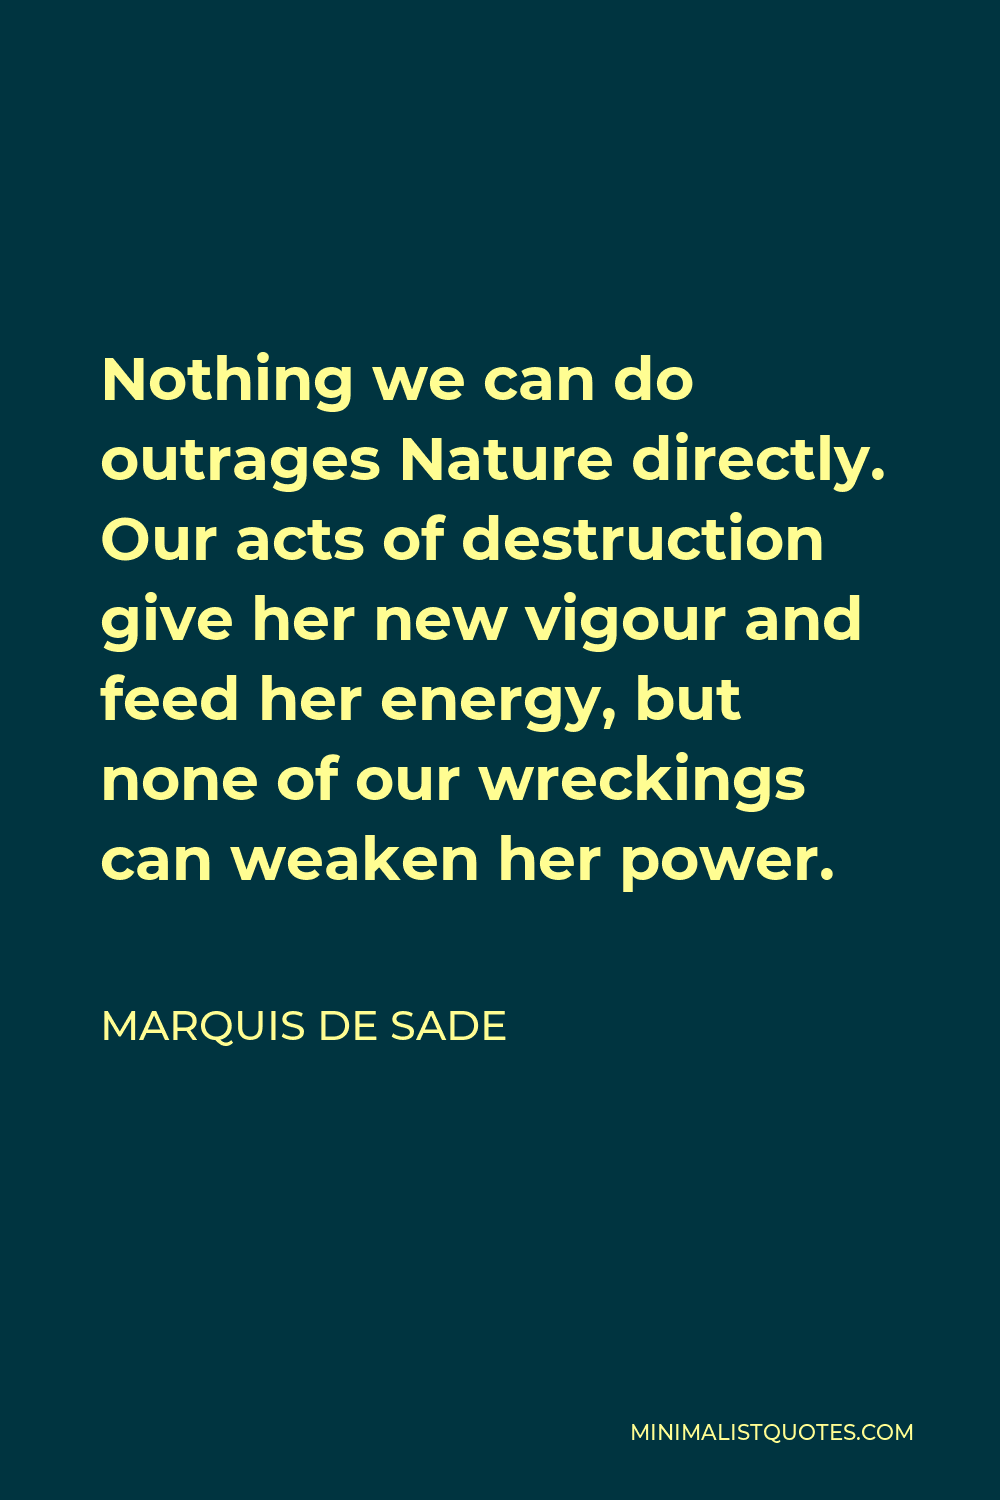 Marquis de Sade Quote - Nothing we can do outrages Nature directly. Our acts of destruction give her new vigour and feed her energy, but none of our wreckings can weaken her power.